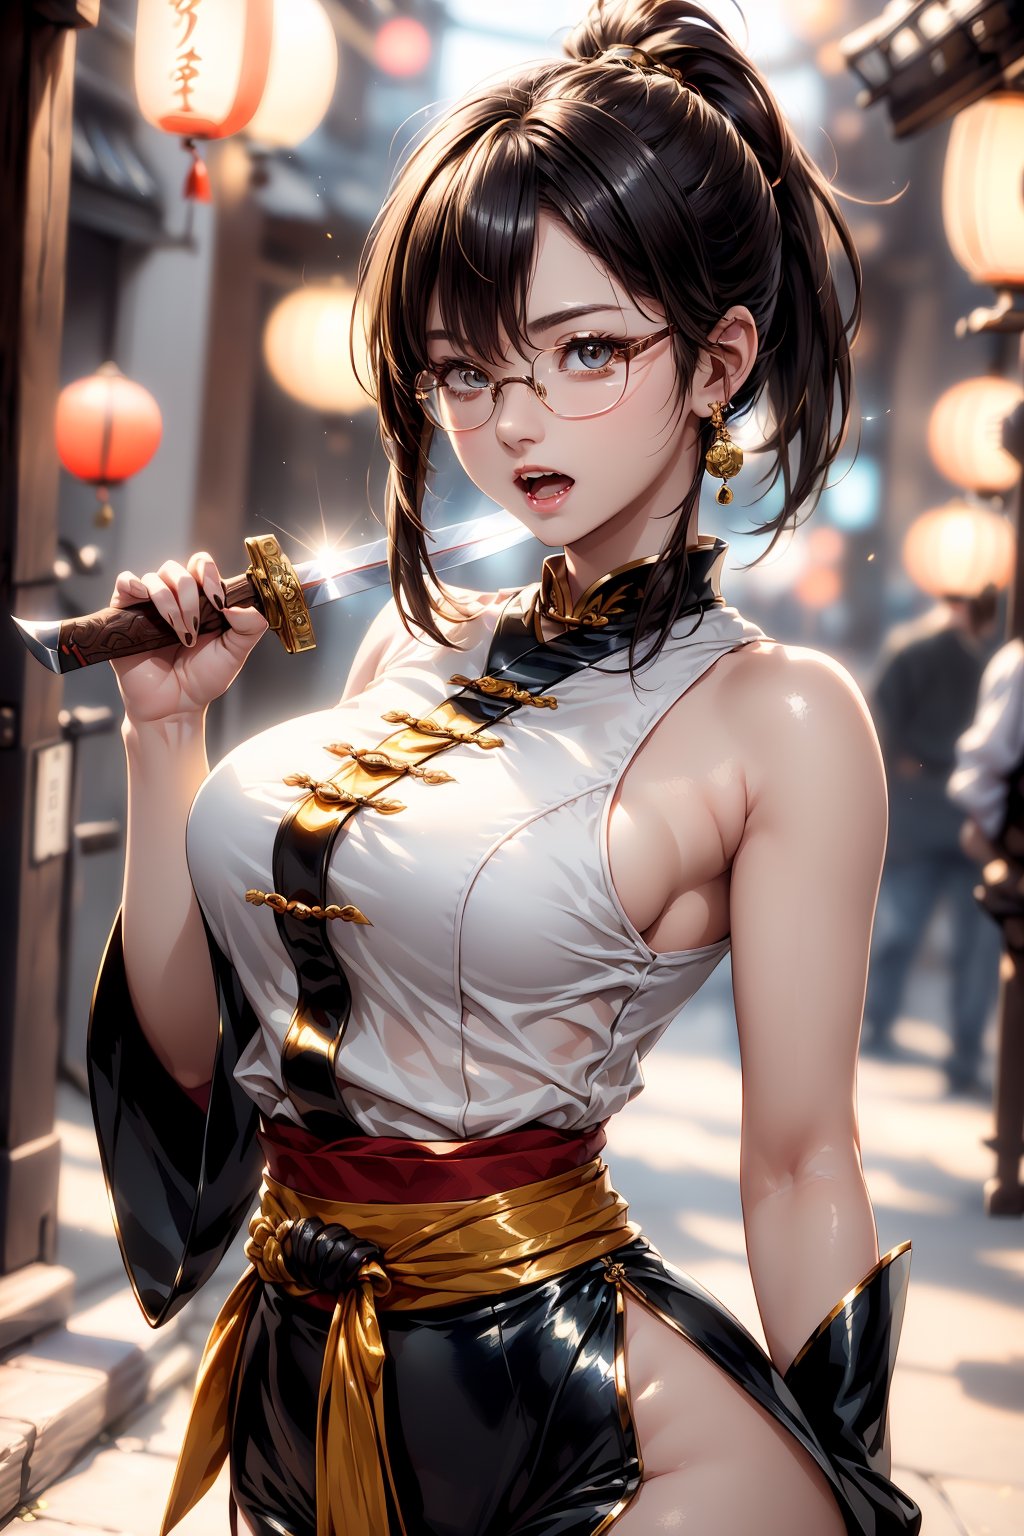 (1girl:1.3, solo), (a extremely pretty and beautiful girl), (Taoist:1.3), (tenten:1.3), (25years old:1.0), (holding a wooden sword and a yellow bill:1.3), (fighting posing:1.3), (looking straight at you:1.3), (starring at you:1.3), (front view:1.3), 
break,
(ponytail:1.3), (shiny -black thin hair:1.2), bangs, (wearing a glasses:1.5), dark brown eyes, beautiful eyes, princess eyes, (big eyes:1.3), bangs, Hair between eyes, short hair:1.3, (slender:1.1 ), (small-medium-breasts:0.95), (thin waist: 1.15), (detailed beautiful girl: 1.4), Parted lips, Red lips, full-make-up face, (shiny skin), ((Perfect Female Body )) , (cowboy shot:1.3), Perfect Anatomy, Perfect Proportions, (most beautiful Korean actress face:1.3, extremely cute and beautiful Japanese actress face:1.3), (surprised, open mouth, scream)
BREAK,
(View viewer, wearing an ancient traditional Taoist uniform, (detailed elegant outfit:1.3), (red taoist uniform:1.3), detailed clothes,
BREAK,
(simple white background), (Studio soft lighting: 1.3), (fake lights: 1.3), (backlight: 1.3), BREAK, (Realistic, Photorealistic: 1.37), (Masterpiece, Best Quality : 1.2), (Ultra High Resolution: 1.2 ), (RAW Photo: 1.2), (Sharp Focus: 1.3), (Face Focus: 1.2), (Ultra Detailed CG Unified 8k Wallpaper: 1.2), (Beautiful Skin: 1.2) , (pale Skin: 1.3), (Hyper Sharp Focus: 1.5), (Ultra Sharp Focus: 1.5), (Beautiful pretty face: 1.3), (super detailed background, detail background: 1.3), Ultra Realistic Photo, Hyper Sharp Image , Hyper Detail Image,